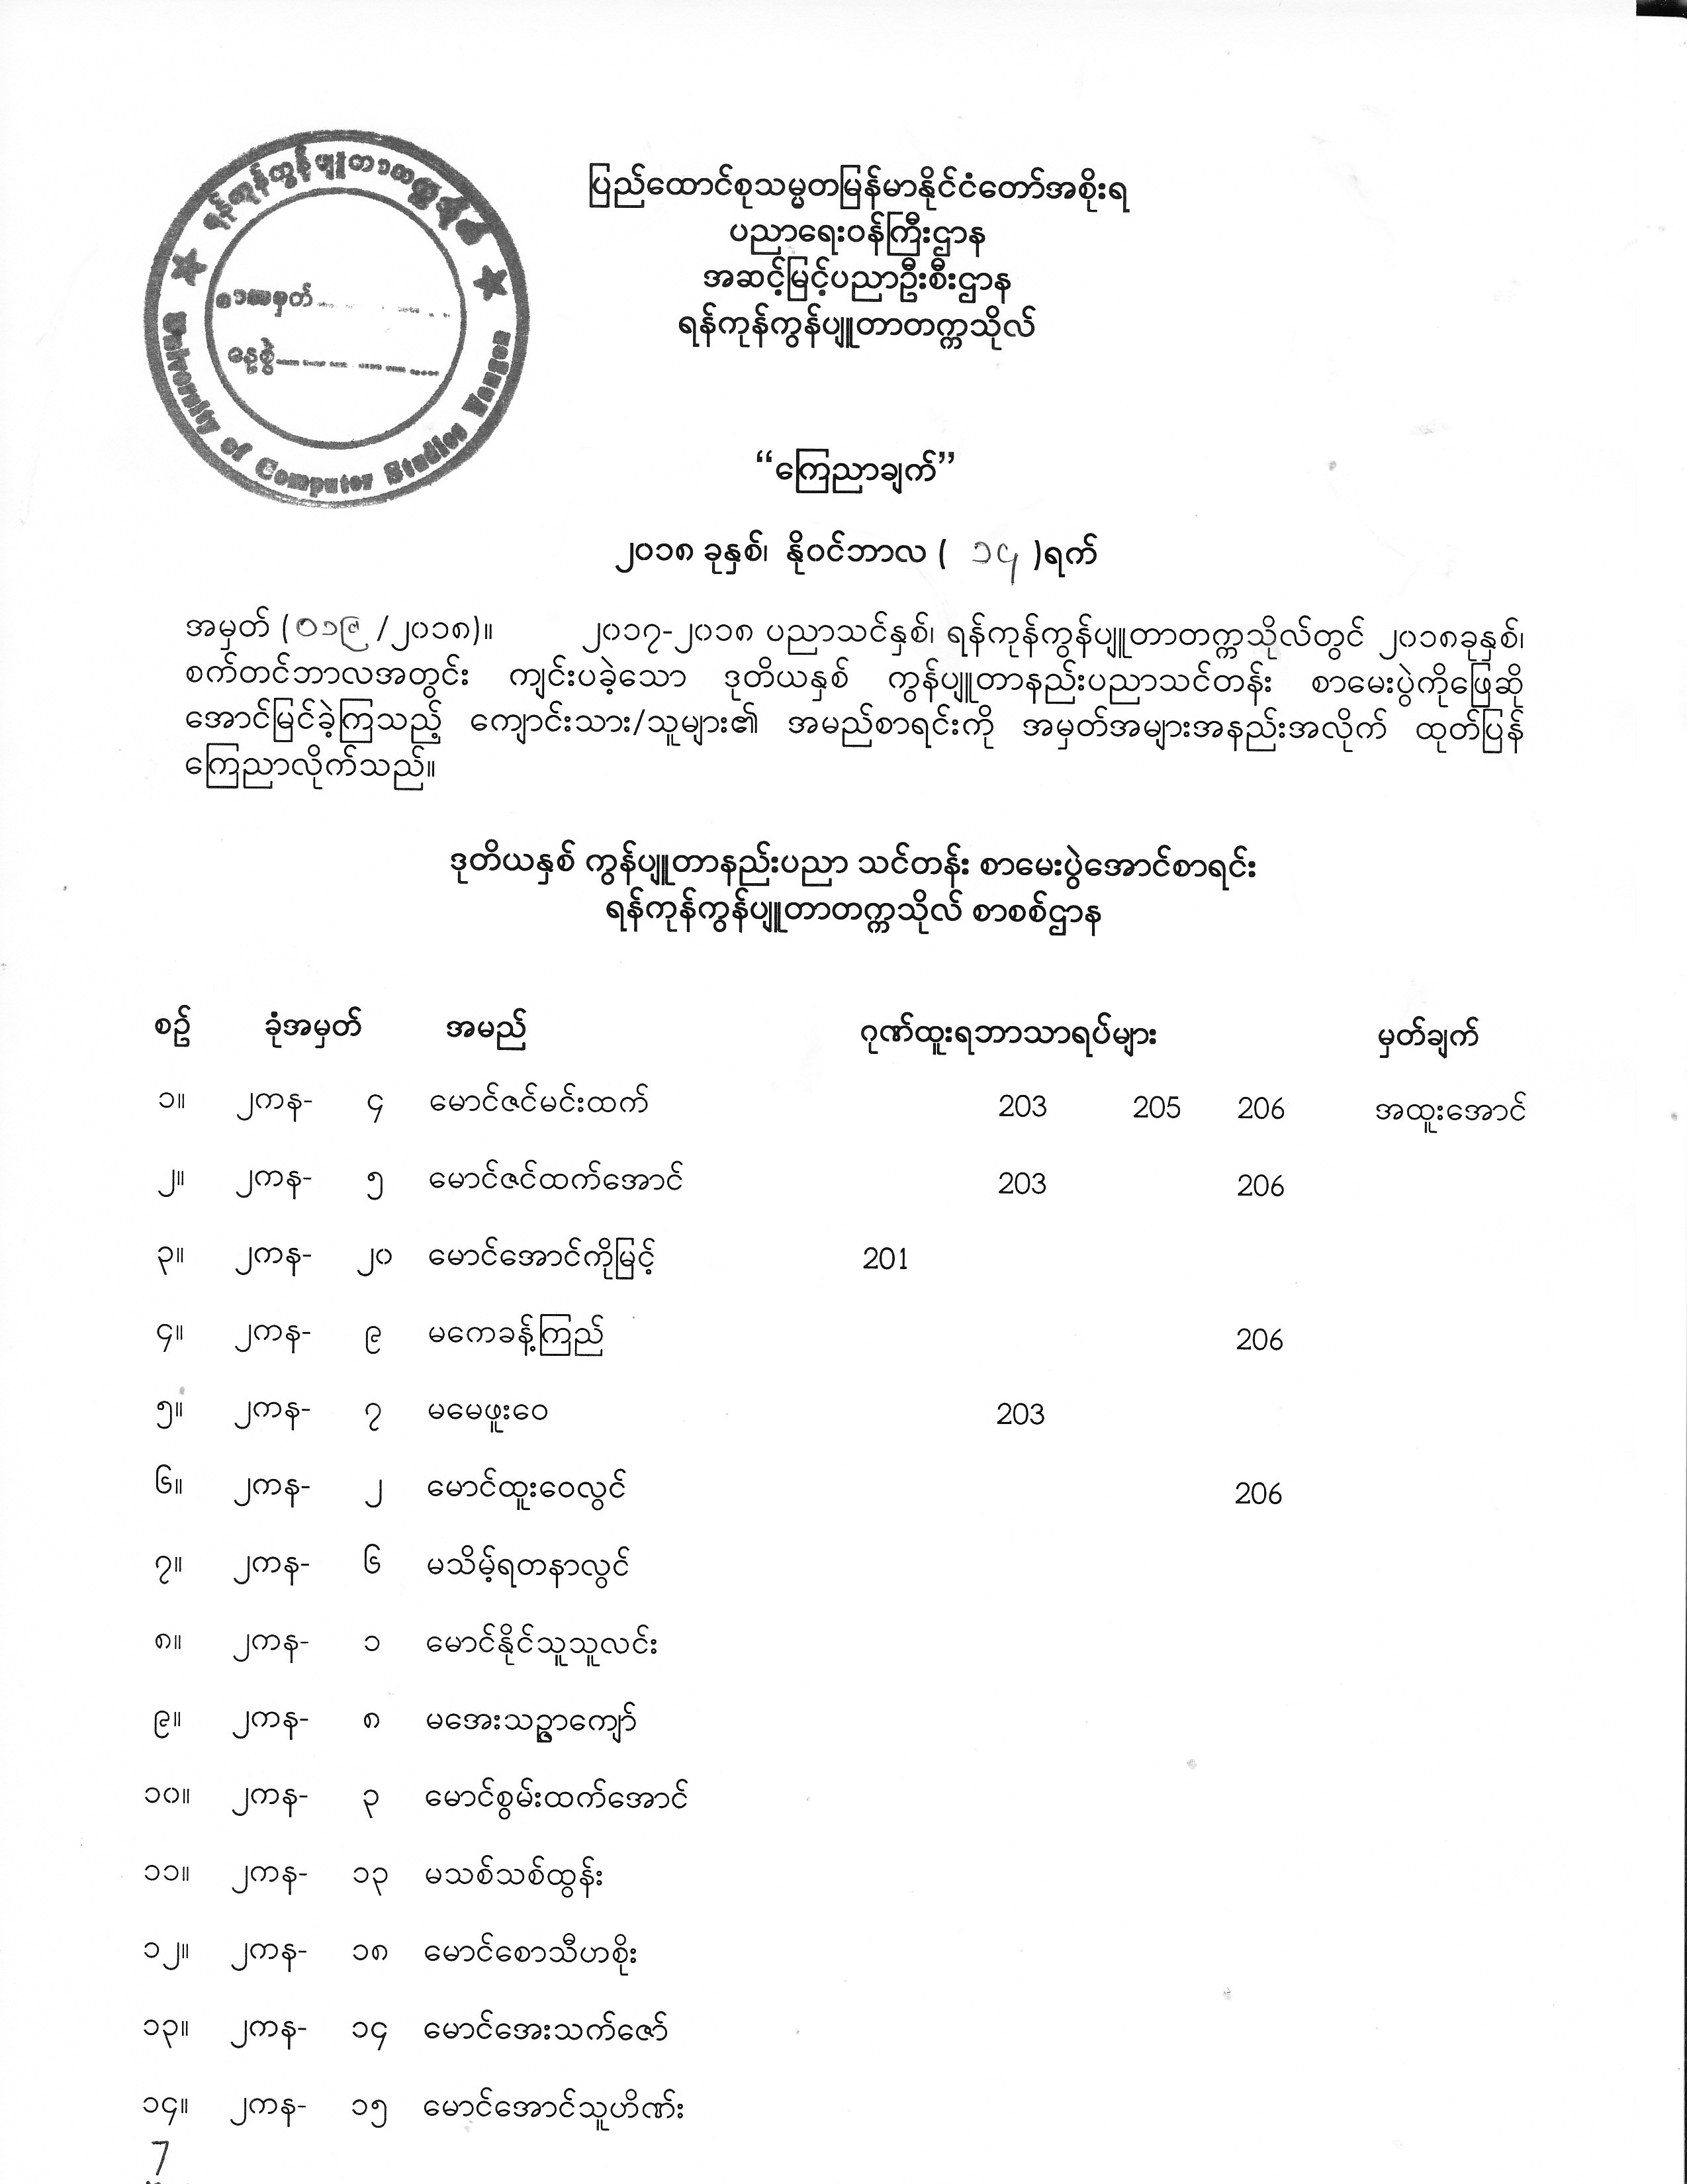 Second Year Exam Result